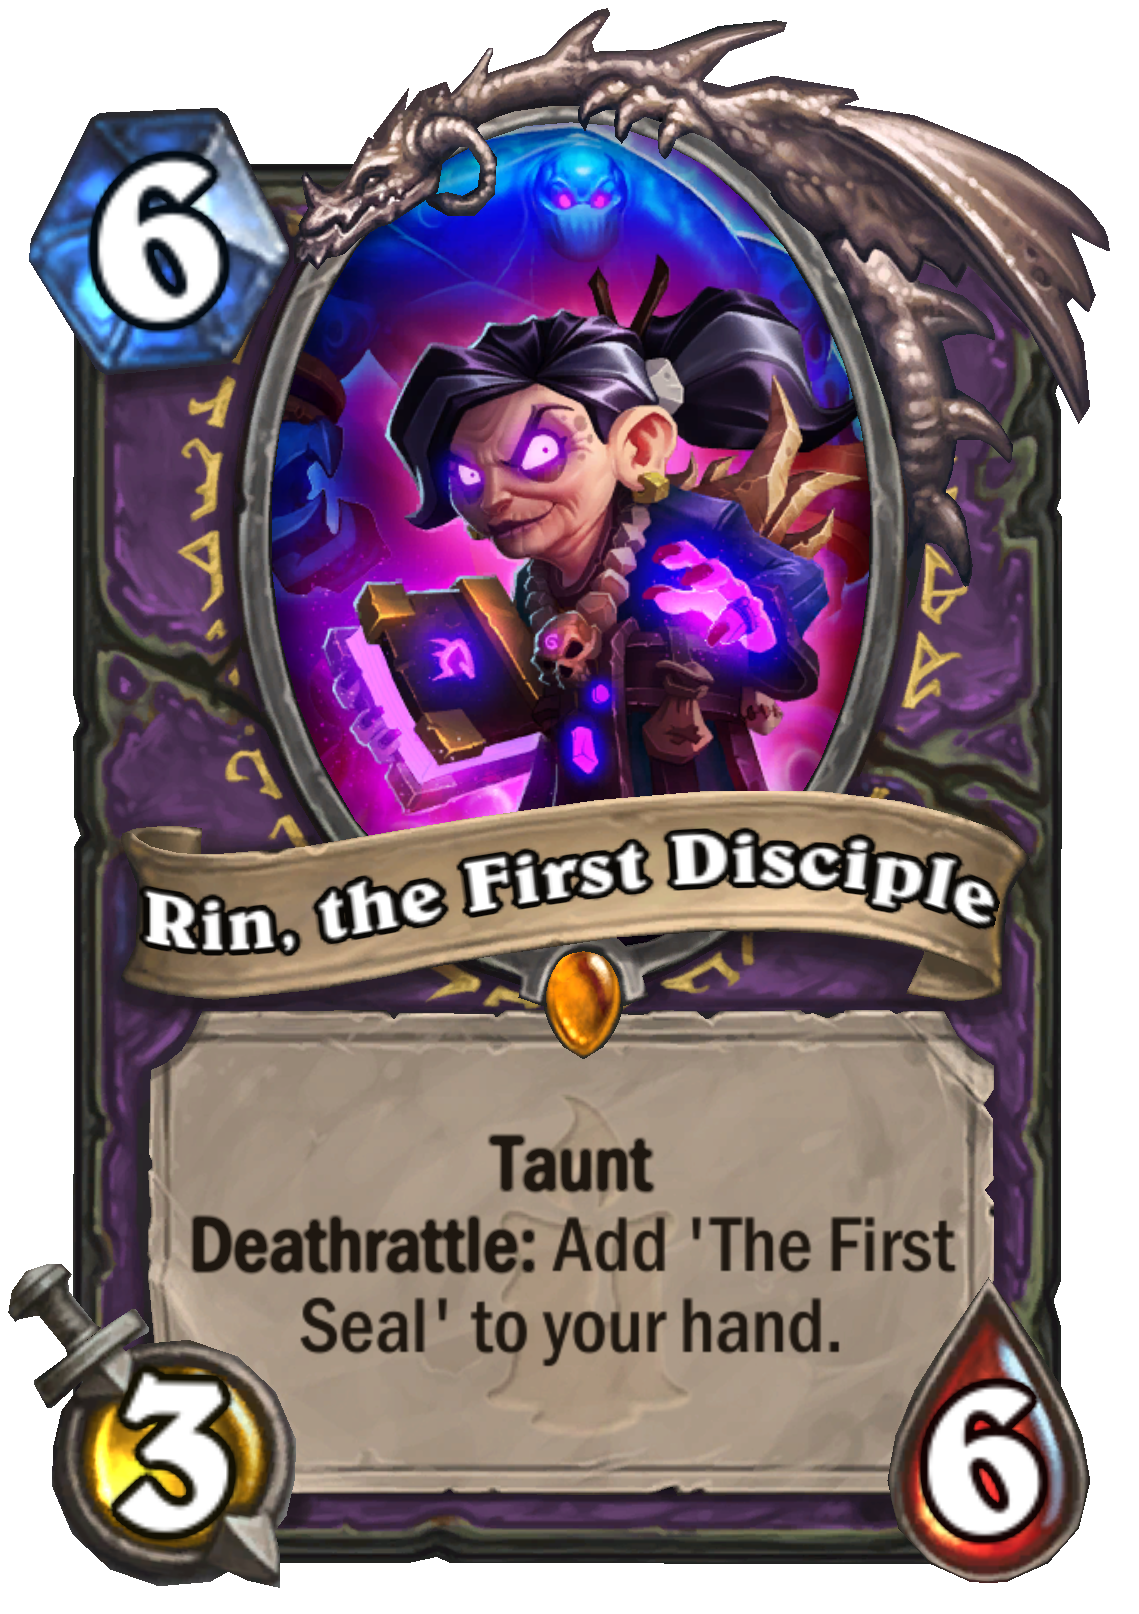 5 New Hearthstone Cards That We Totally Underestimated